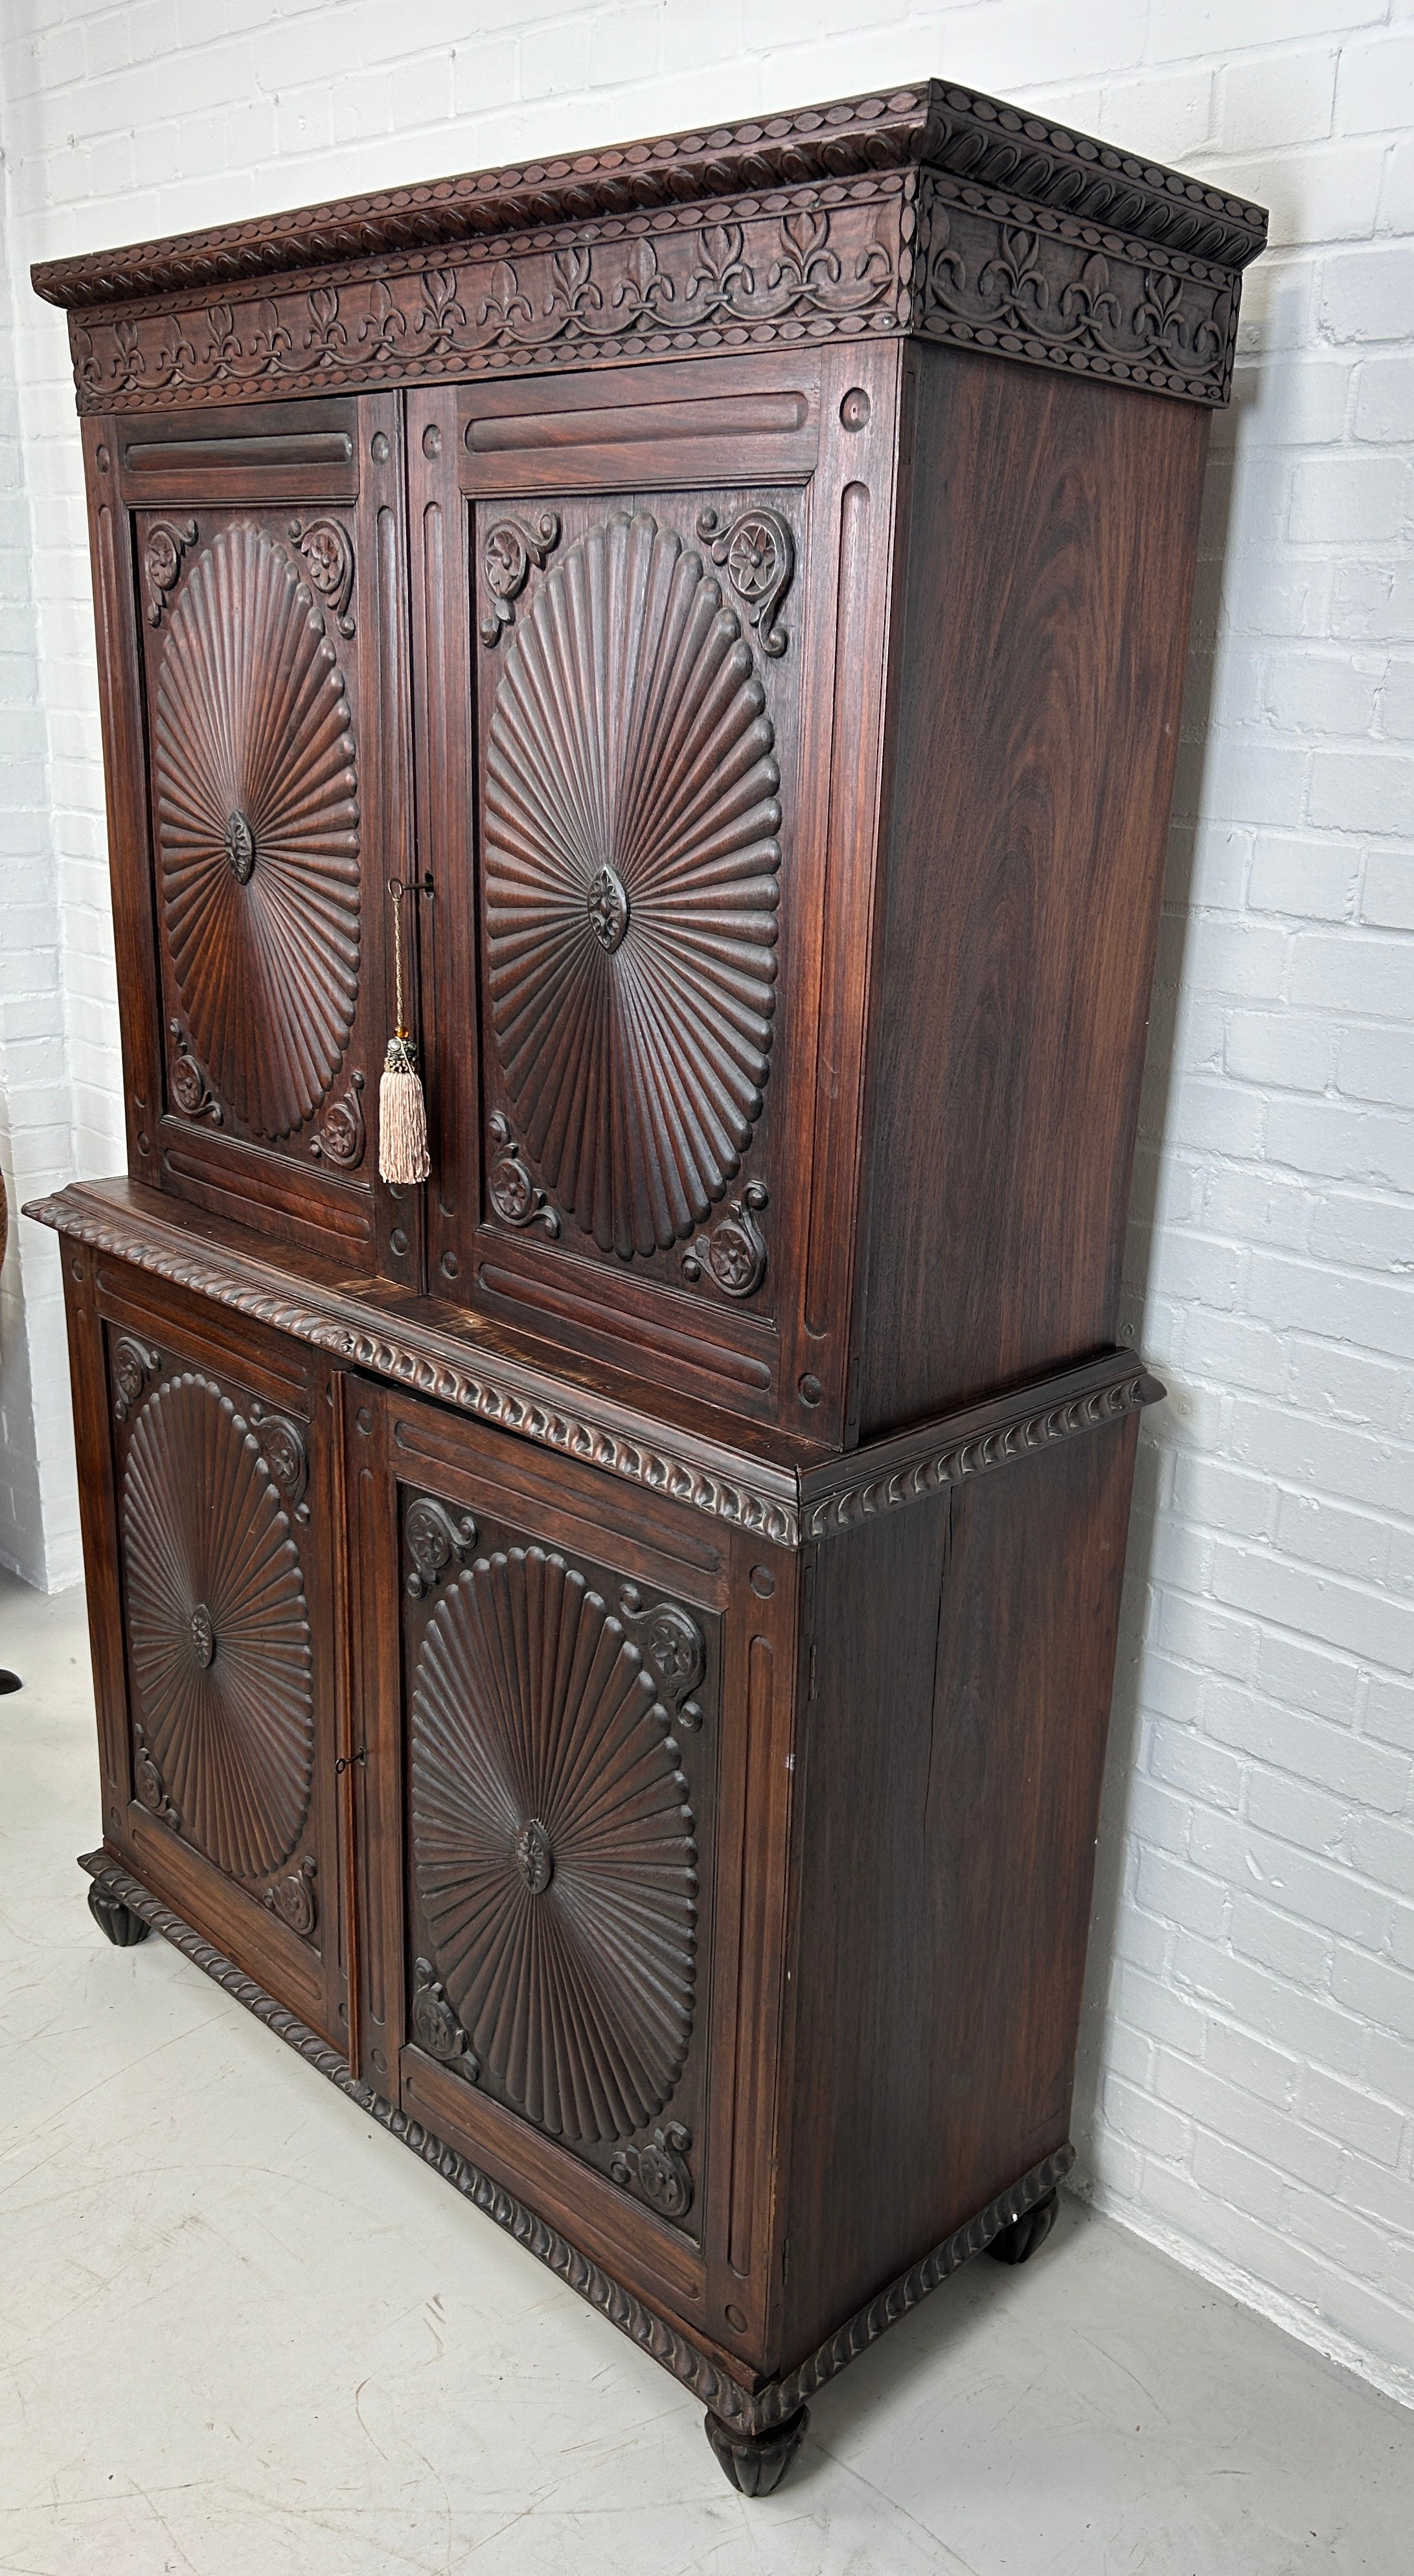 A 19TH CENTURY ANGLO INDIAN ROSEWOOD SECTIONAL WARDROBE WITH SUNBURST DESIGN PANELS, 194cm x 120cm x - Image 2 of 9